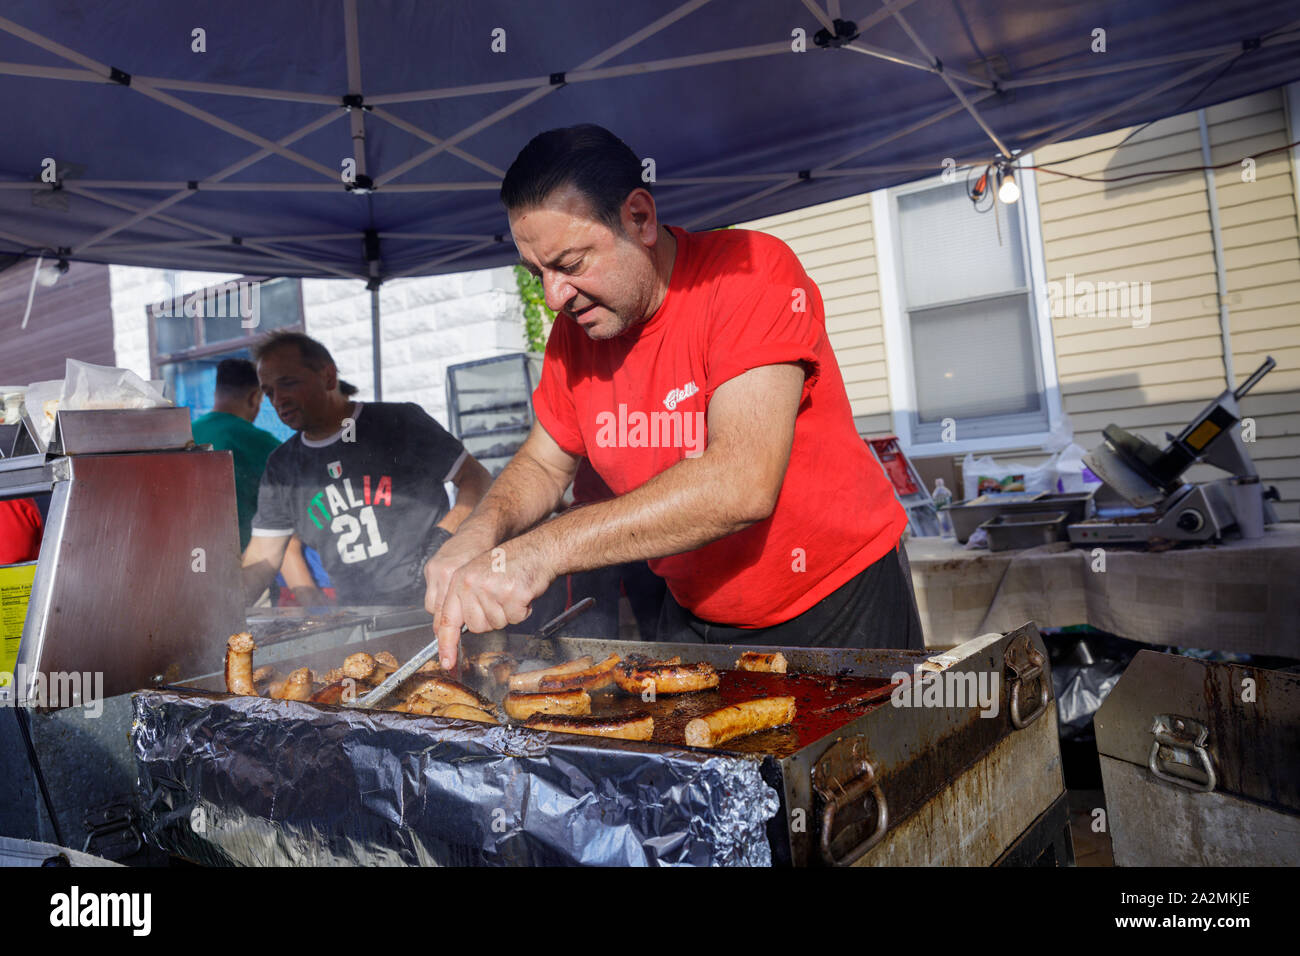 Italian Festival, Schenectady, New York: Man cooking sausage on a grill. Stock Photo